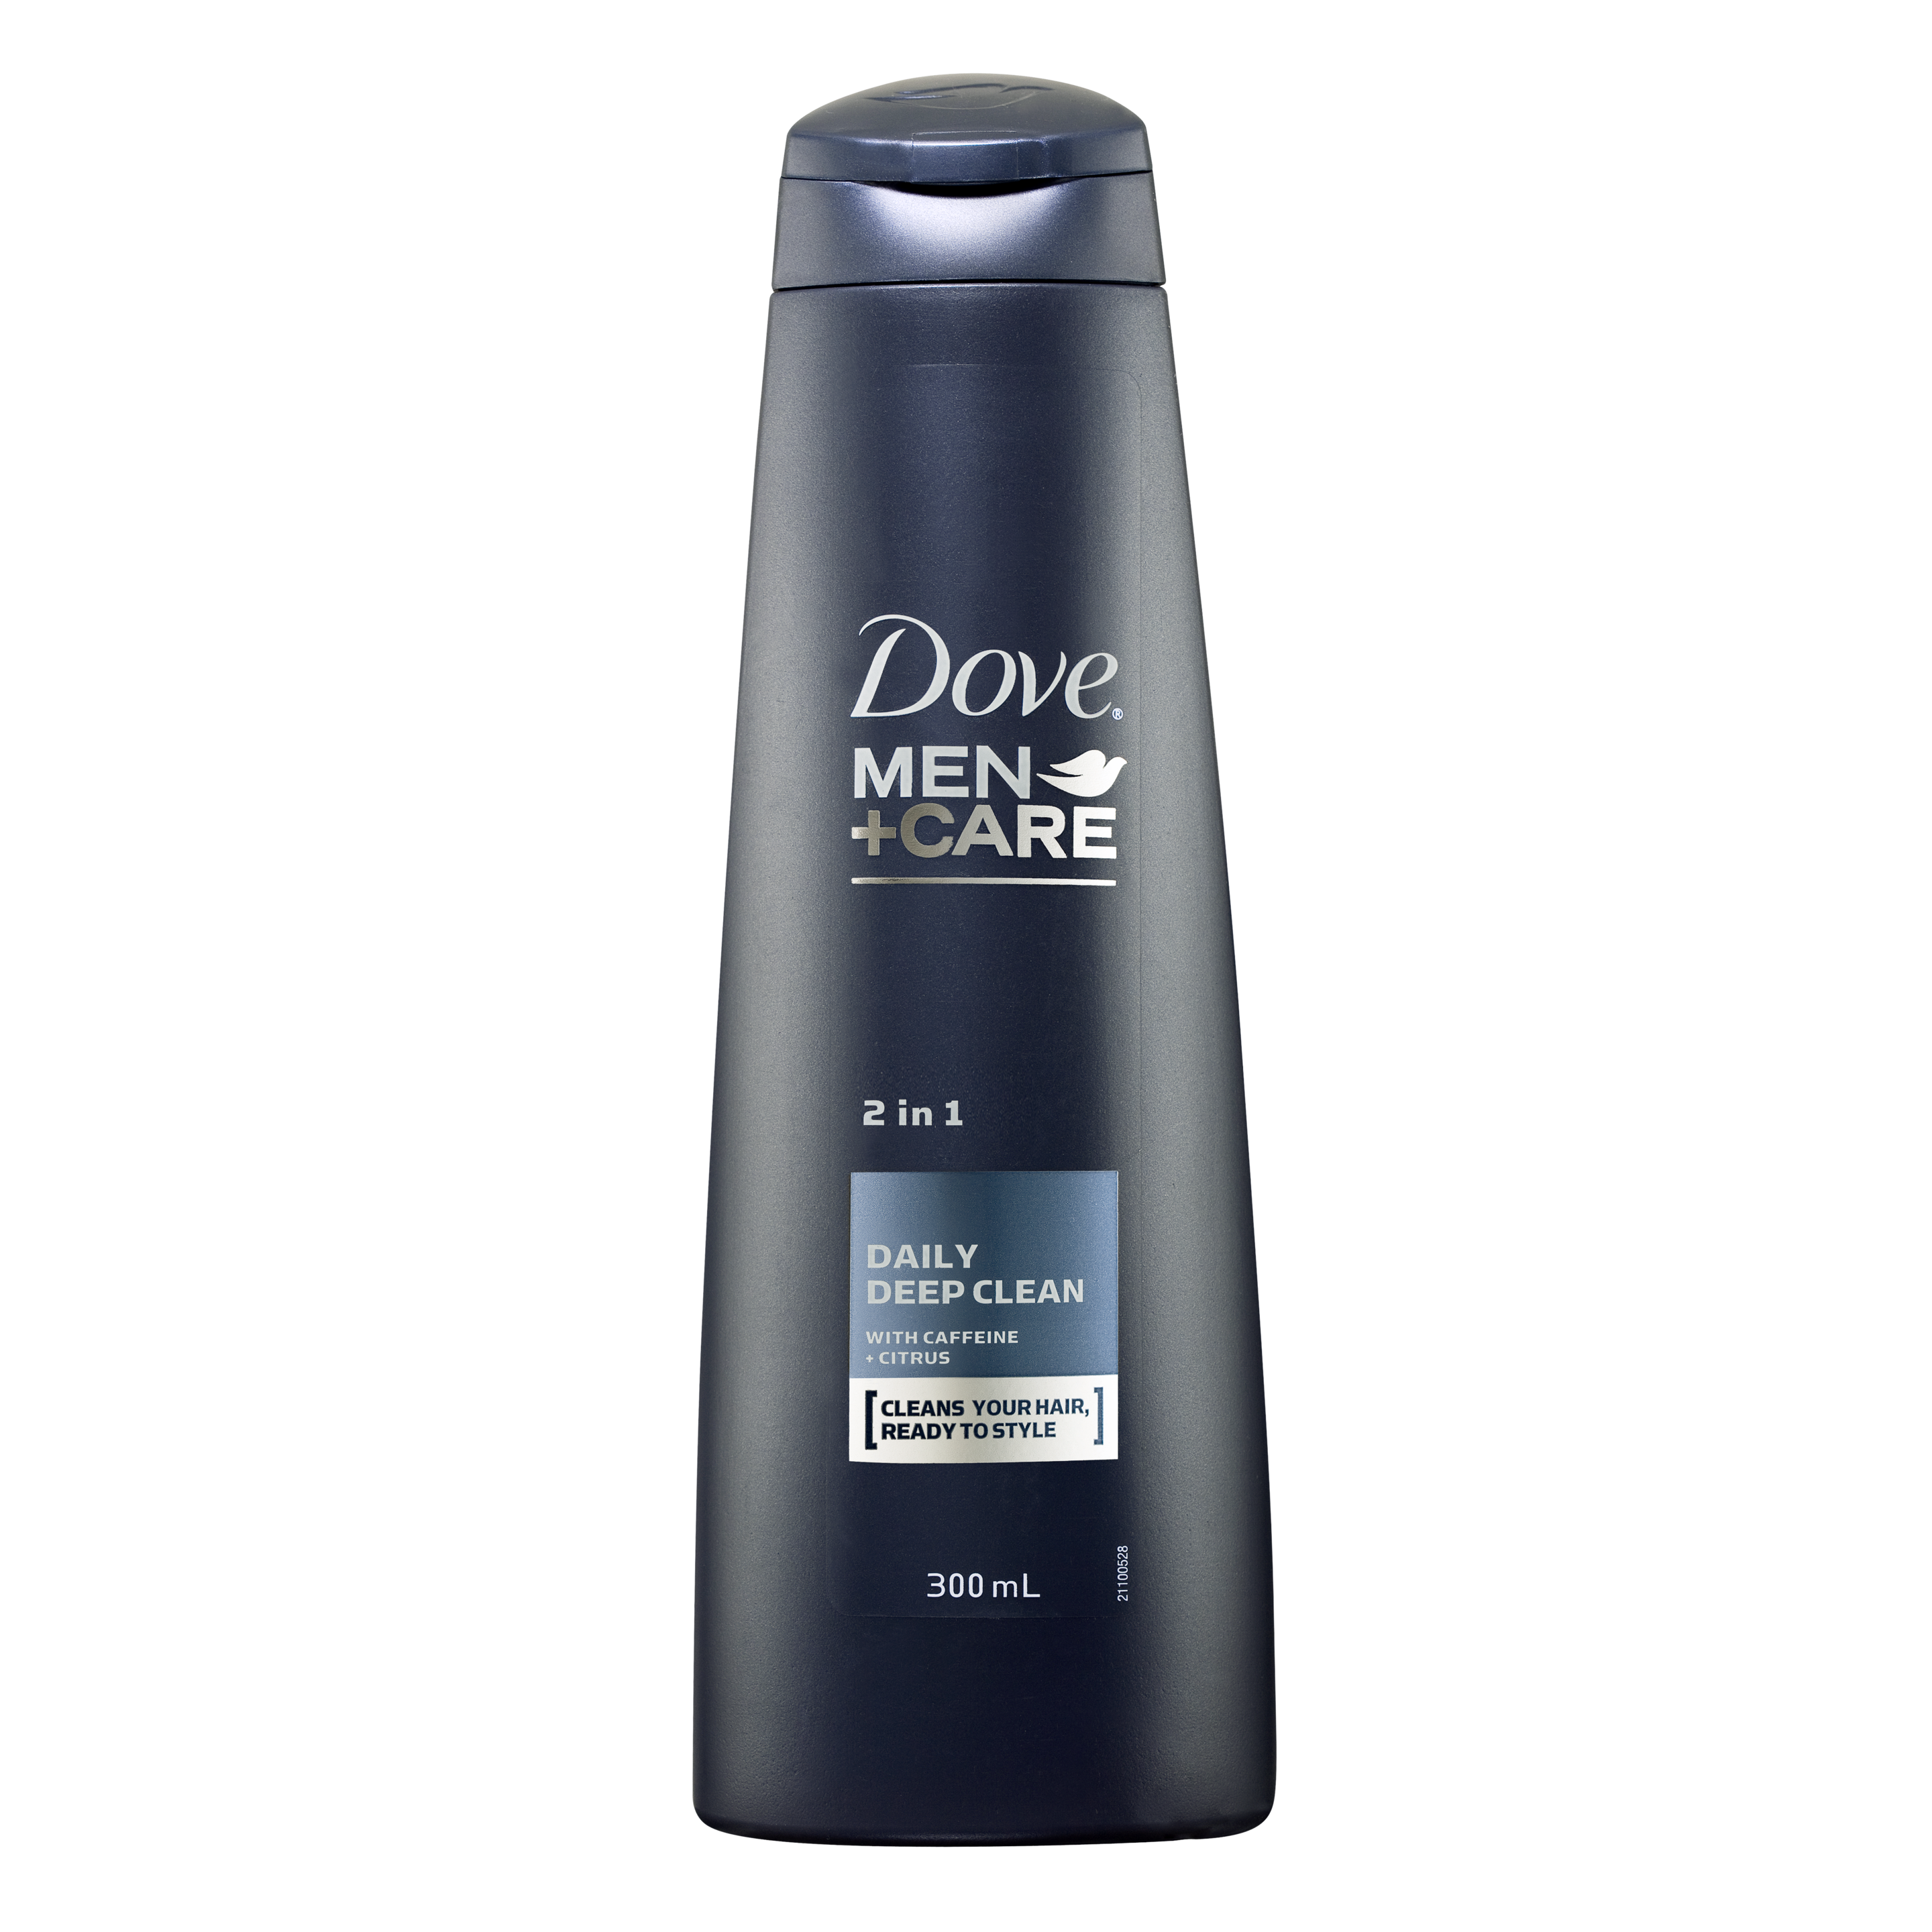 Dove Men+Care Daily Deep Clean Fortifying 2 in 1 Shampoo 300ml